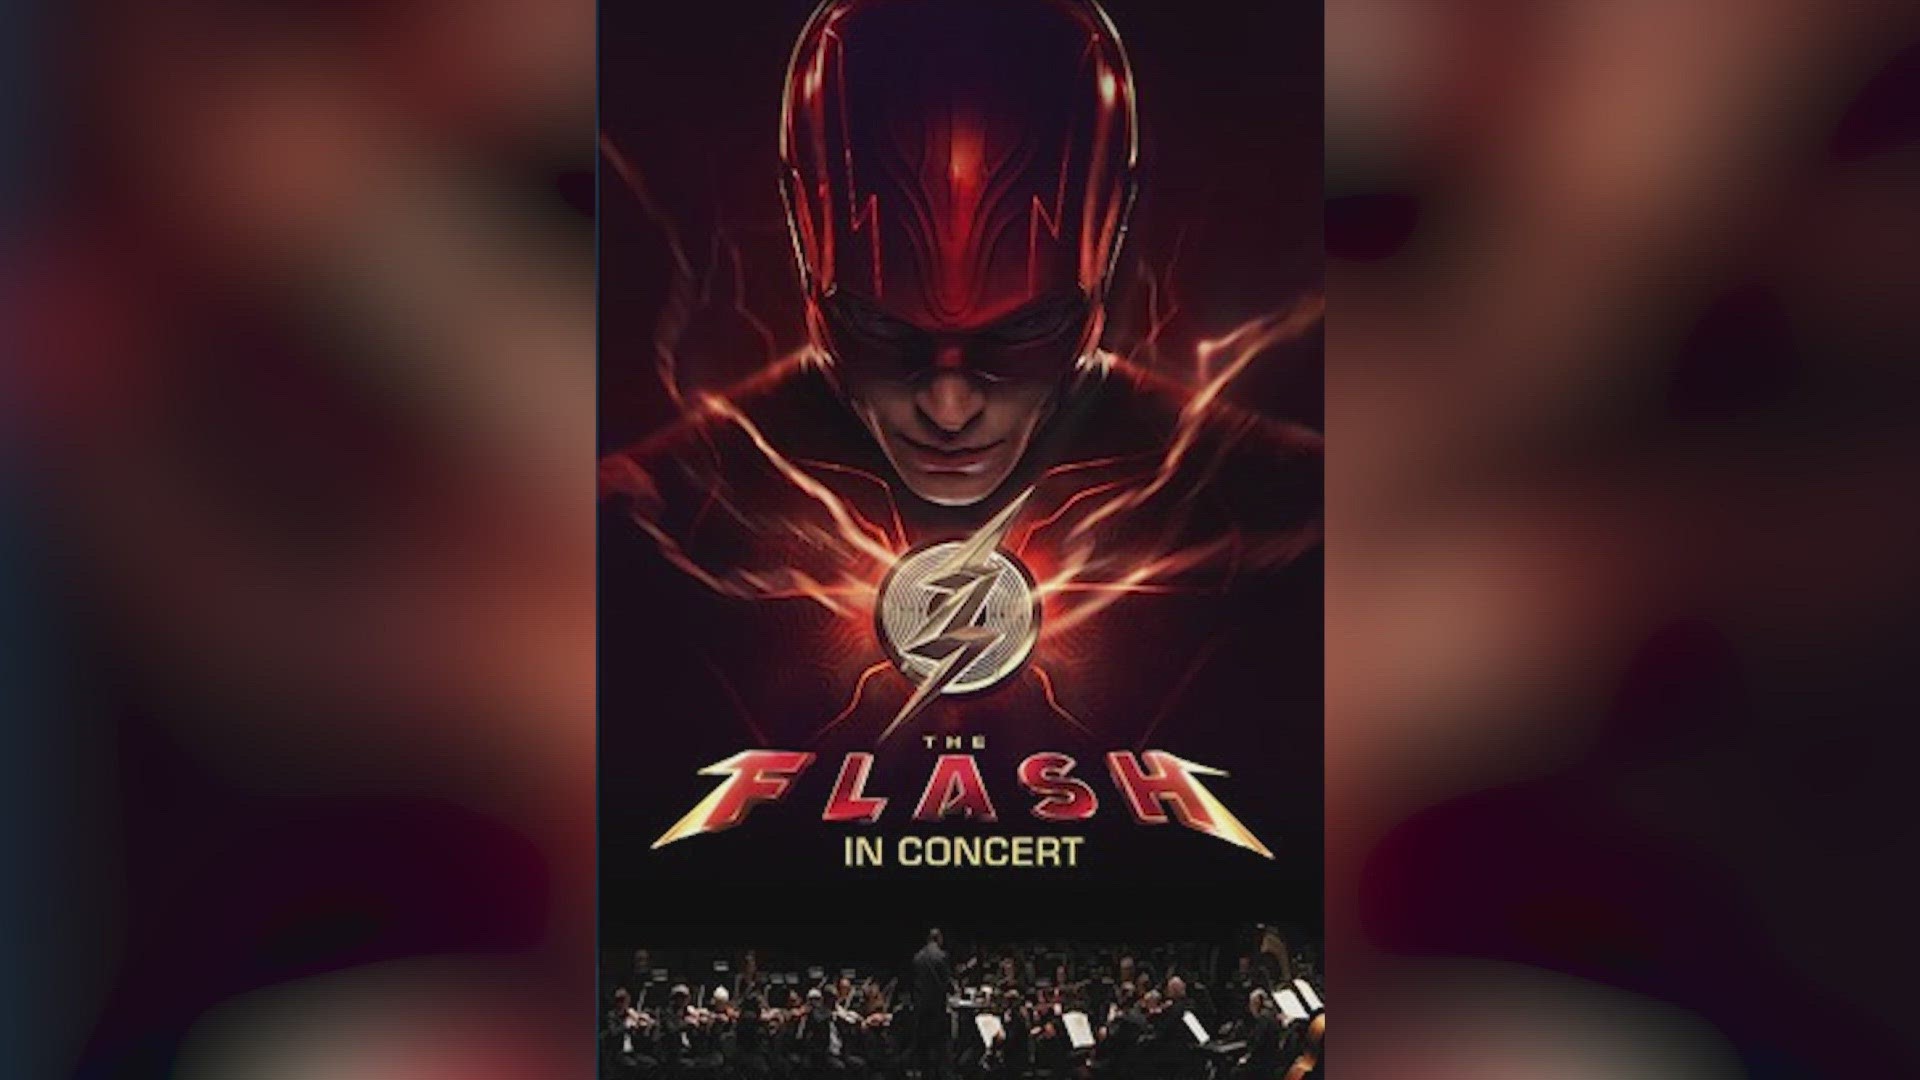 The unique event will see the Dallas Pops symphony perform the score of "The Flash" along to the film.